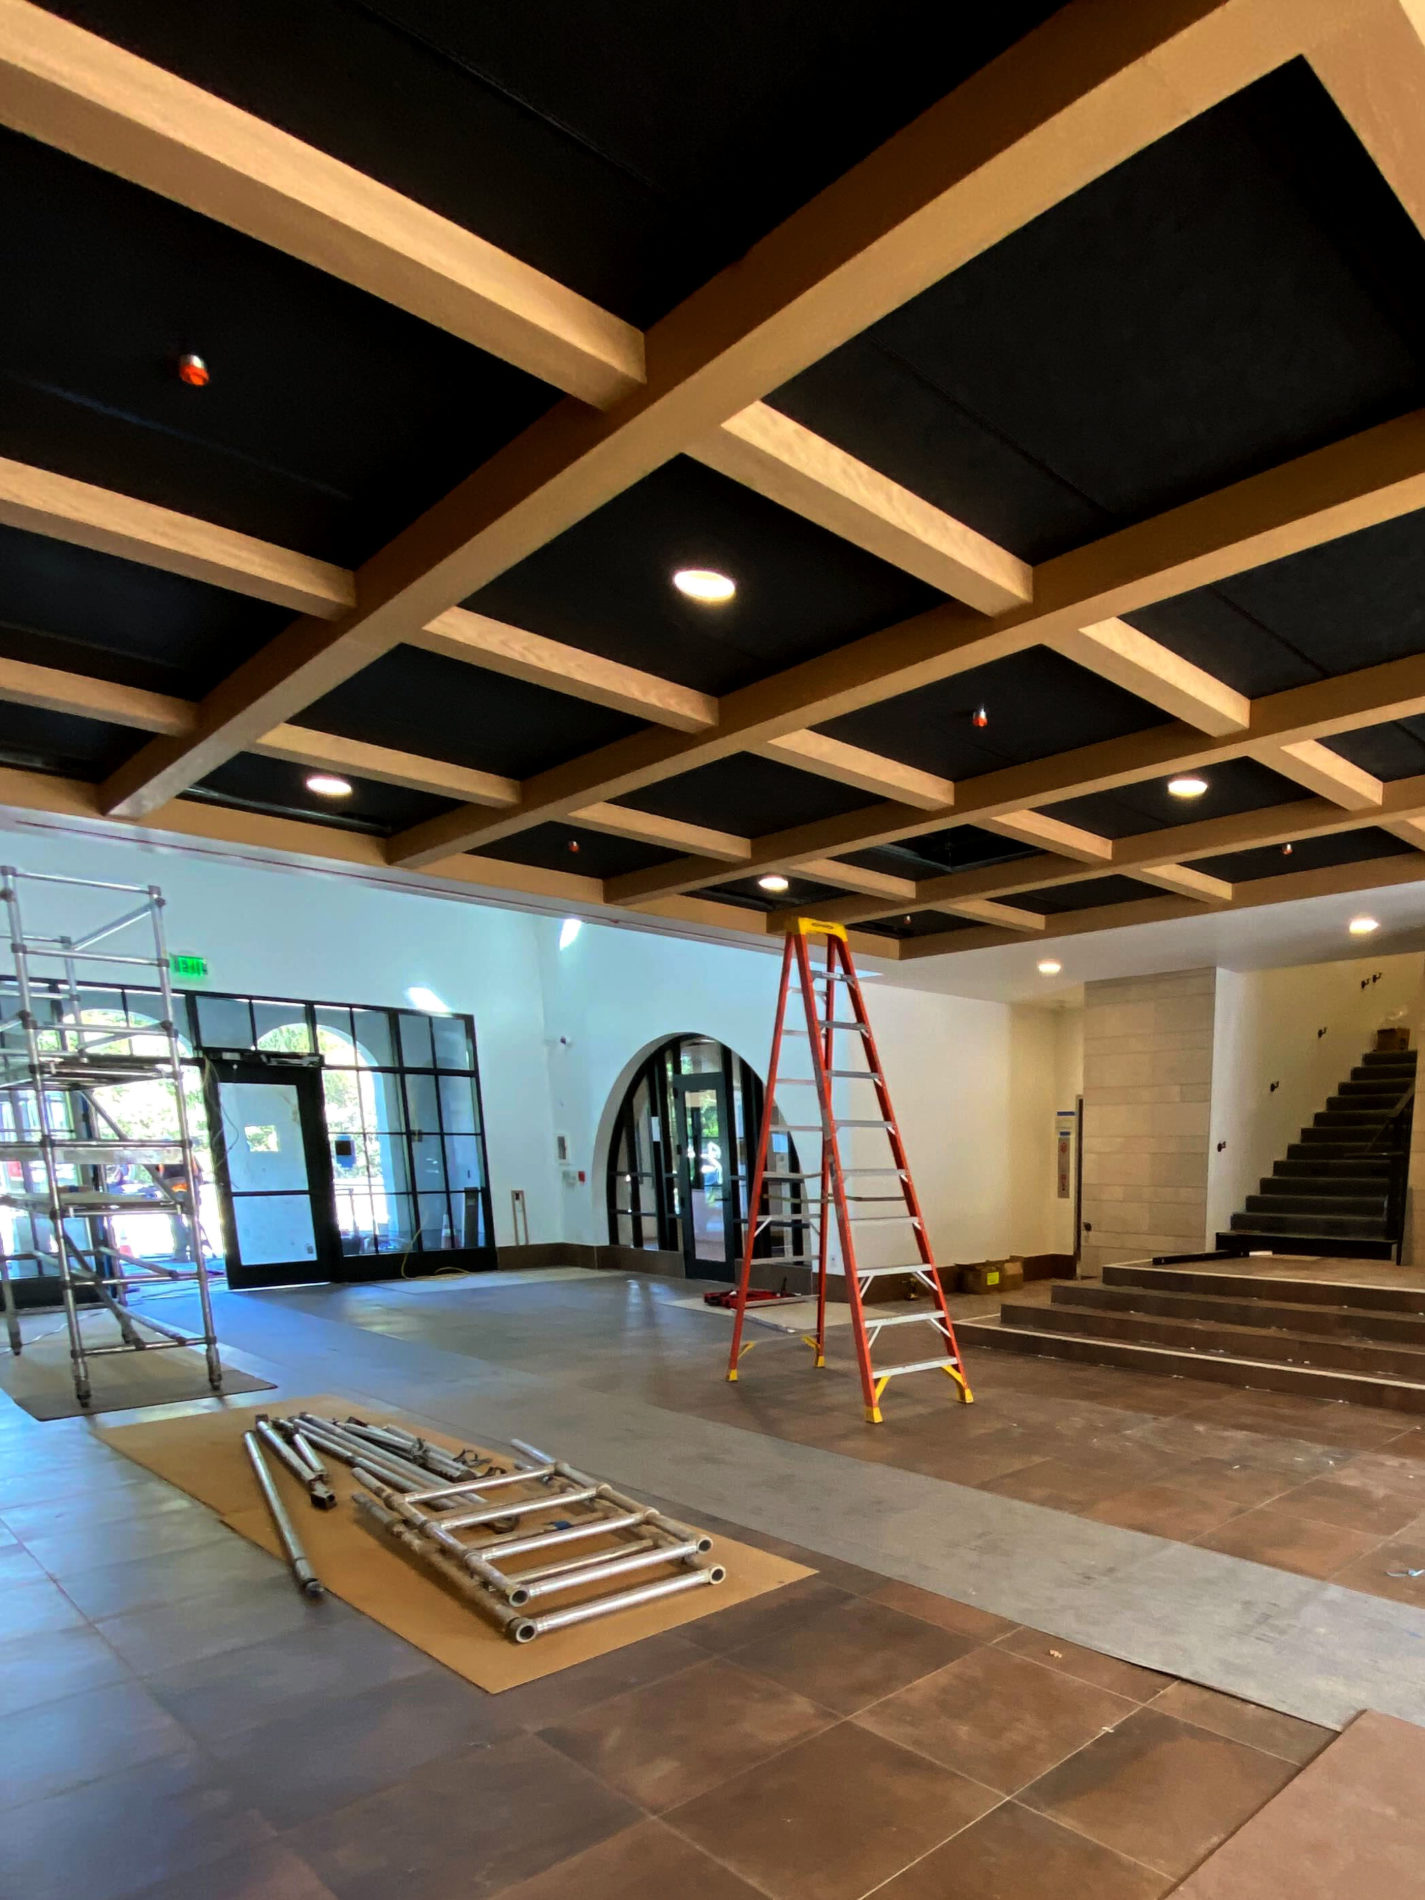 Atherton Civic Center lobby with radiant floors (both heating and cooling).